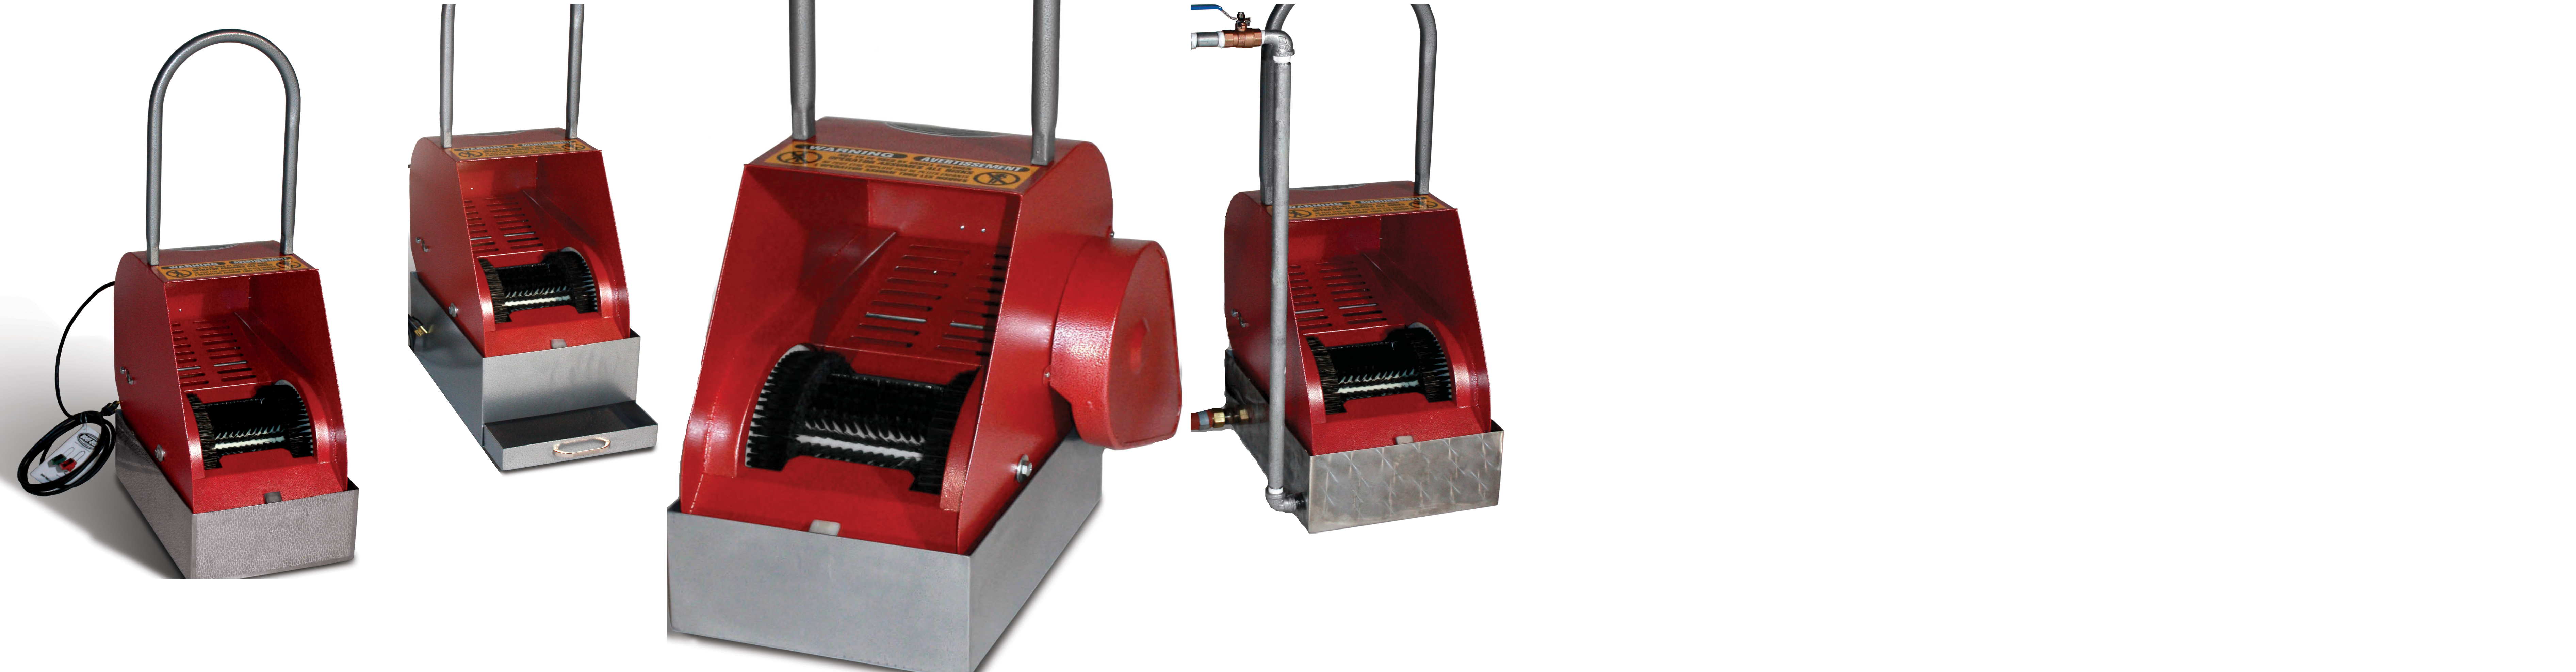 Boot cleaner is footwear cleaning machine for industrial use